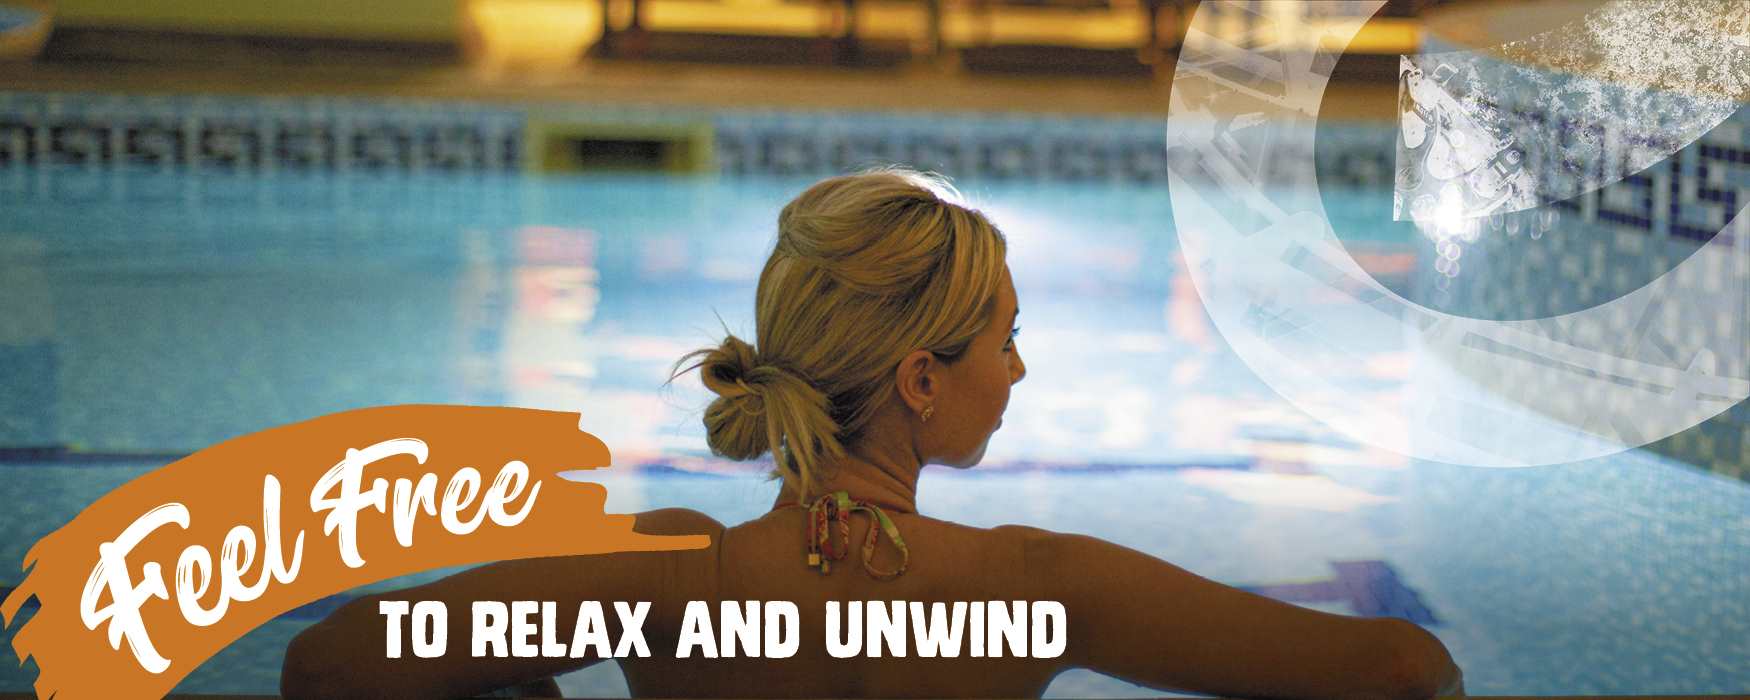 Feel free to relax and unwind at a Staffordshire Spa resort such as Hoar Cross Hall, pictured.